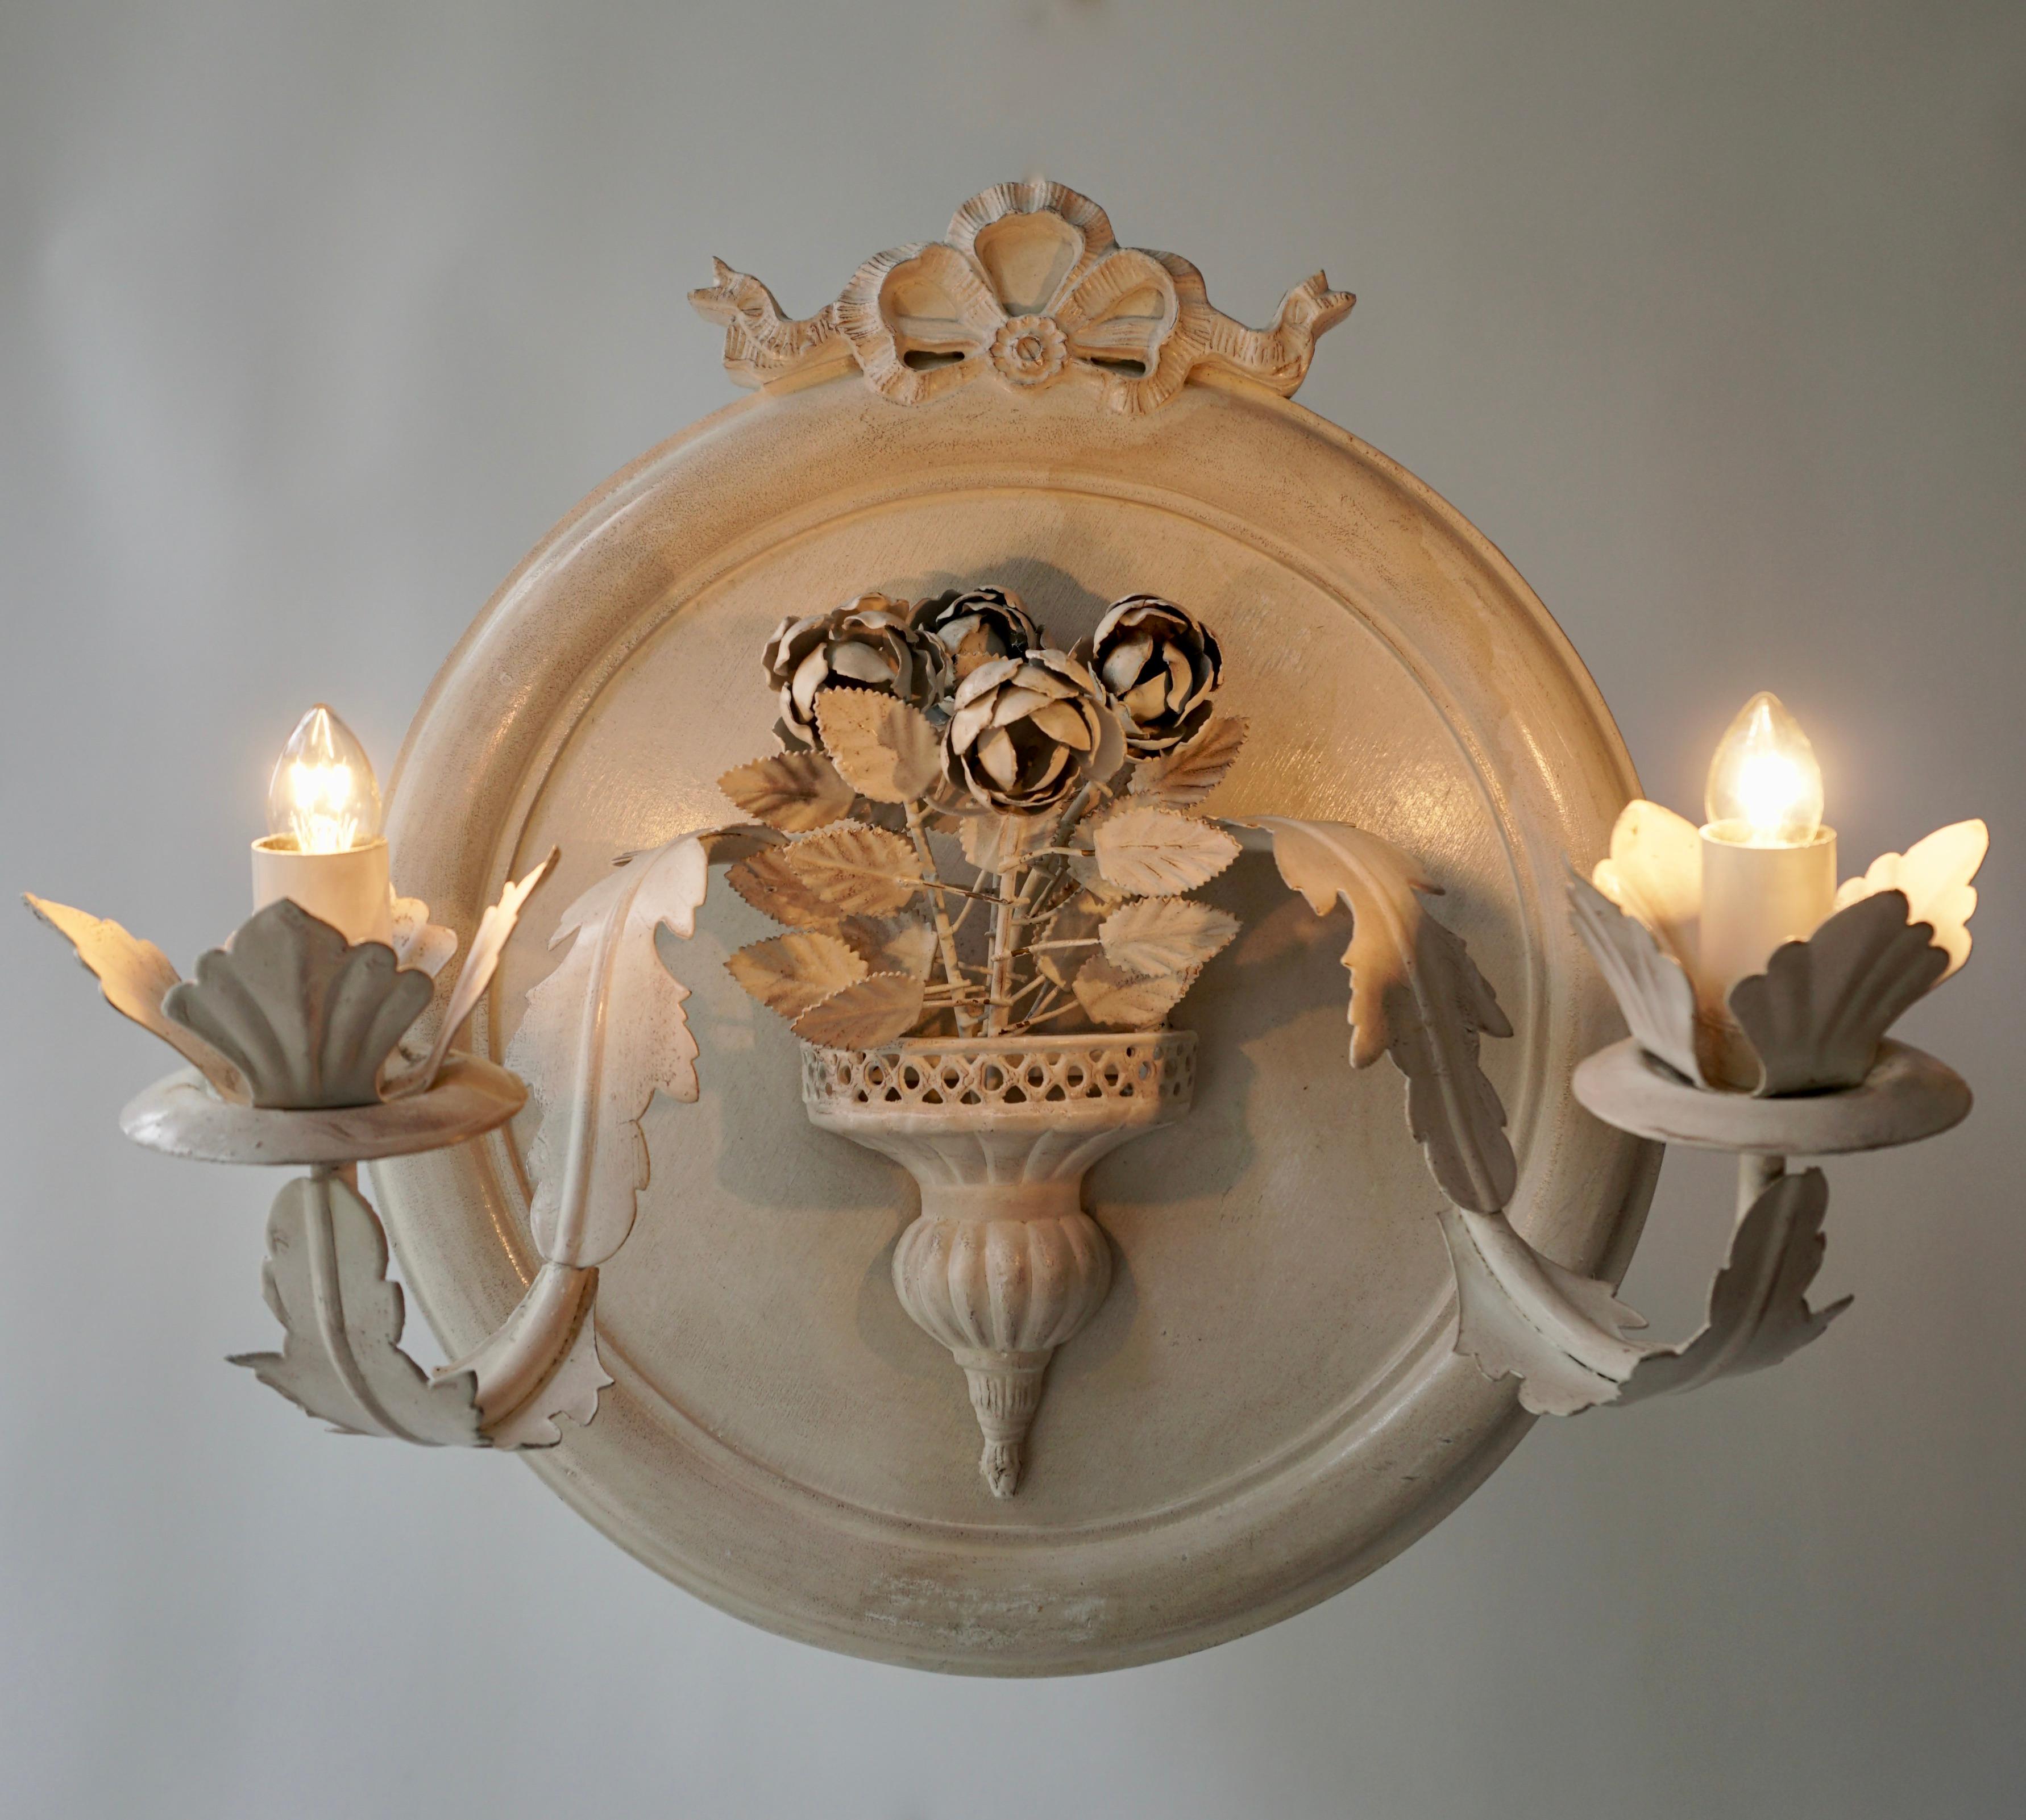 Pair of vintage Italianate white painted metal electric candle sconces, with elaborate layers of leafy and flowers on a round wooden white painted background.

Condition: Good condition with expected signs of wear.